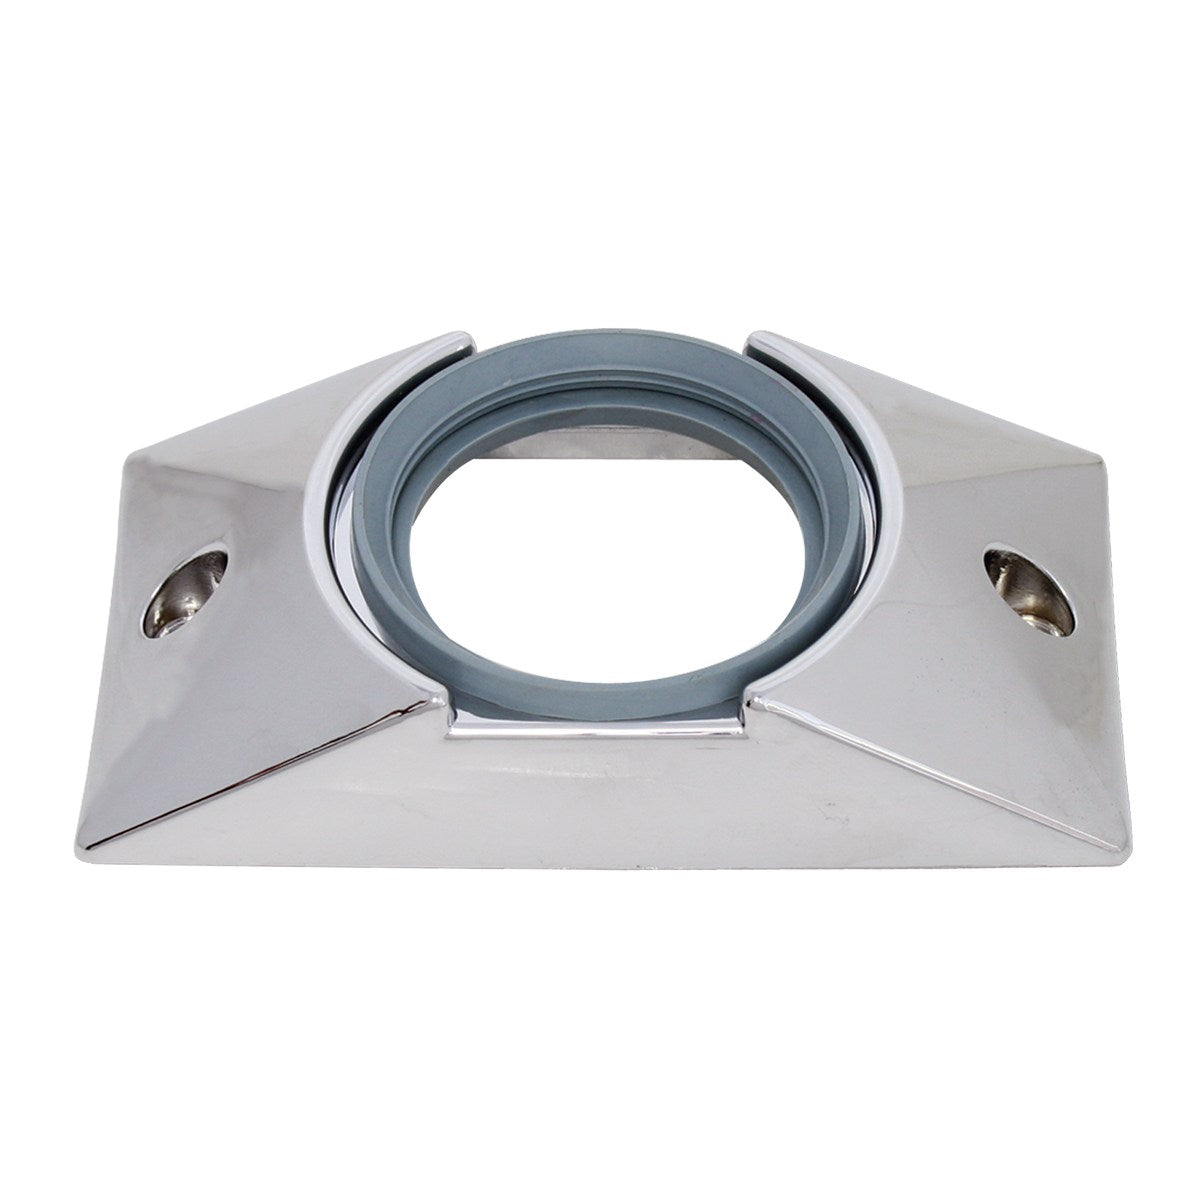 MOUNTING BRACKET WITH GROMMET FOR 2-1/2″ ROUND LIGHT